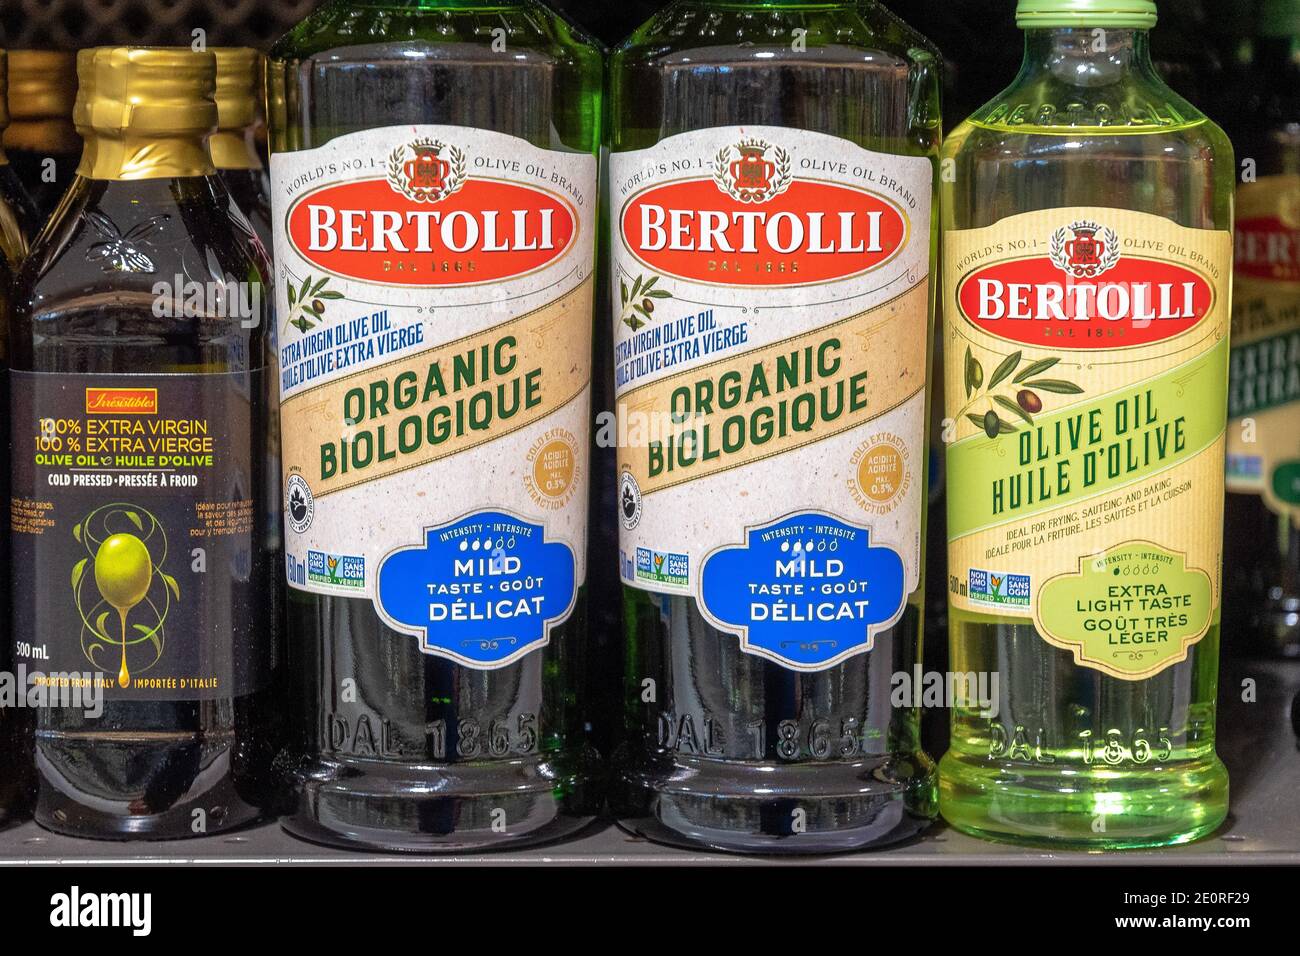 Bertolli branded bottles of olive oil on a supermarket shelf. There are no people in the color scene. Stock Photo